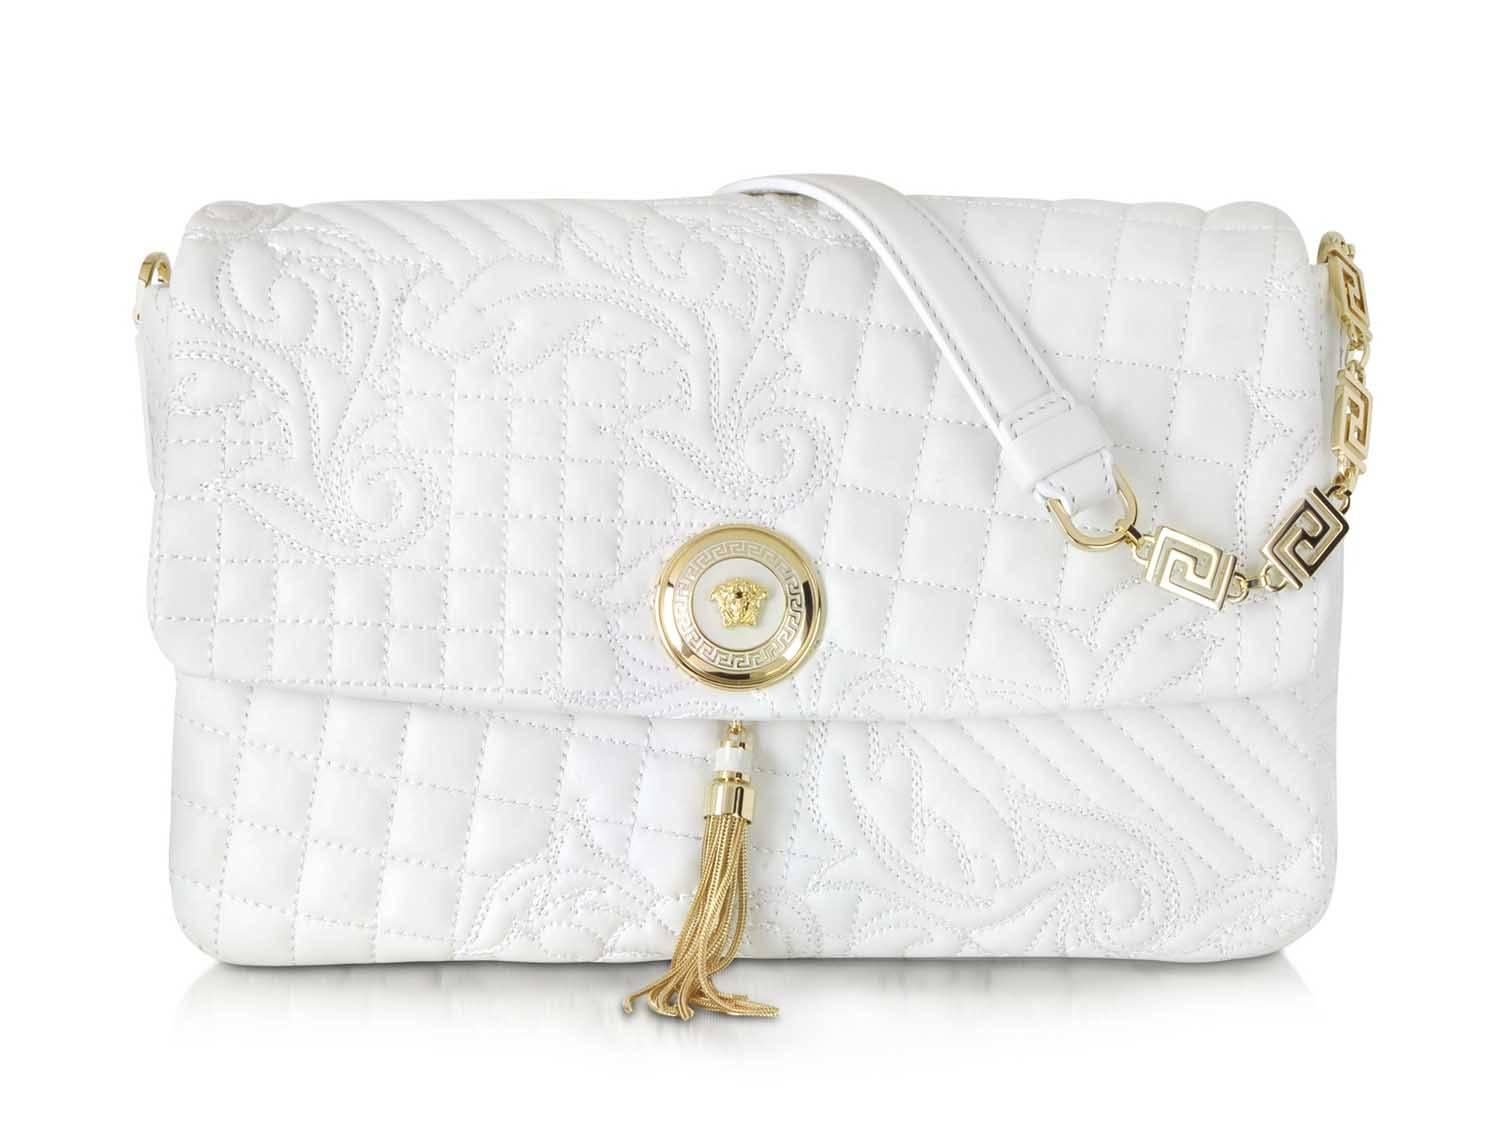 New Versace leather shoulder bag from 'Vanitas' collection.
Medea from the "Vanitas" line is a perfectly sized shoulder bag with a Greca chain detail on the shoulder strap, effortless chic.
White quilted leather with embroidered floral